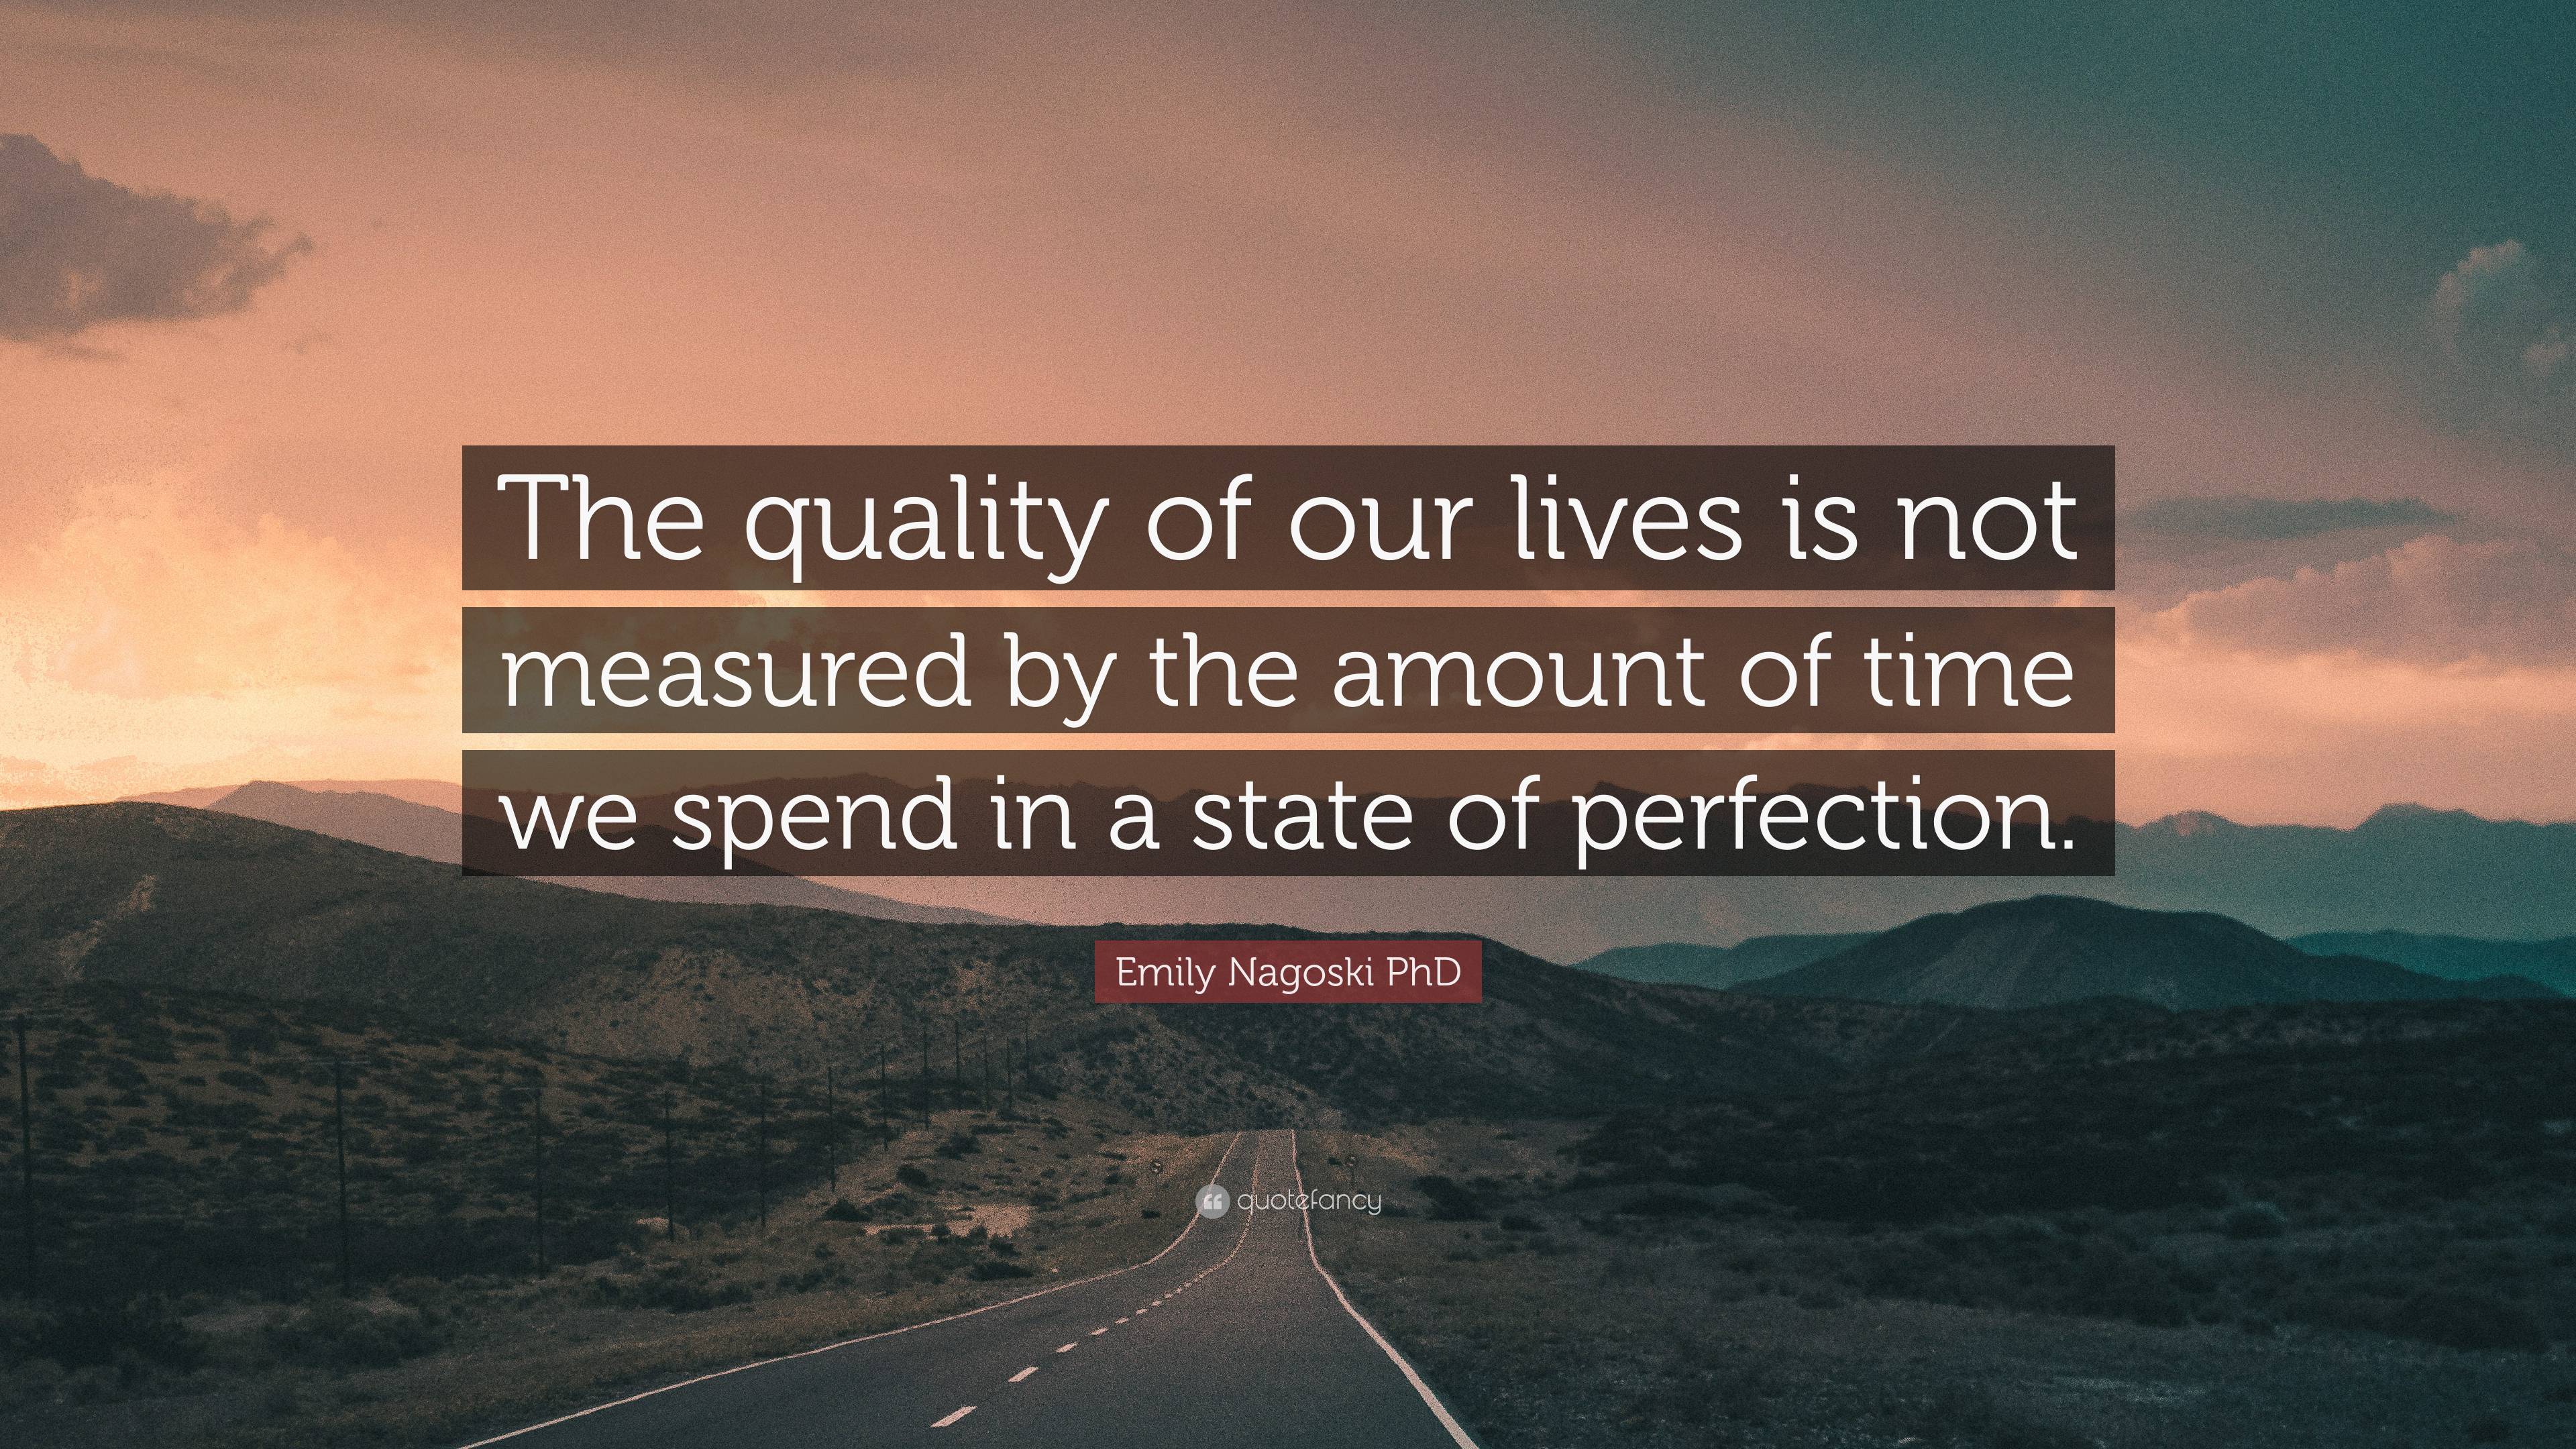 Emily Nagoski PhD Quote: “The quality of our lives is not measured by ...